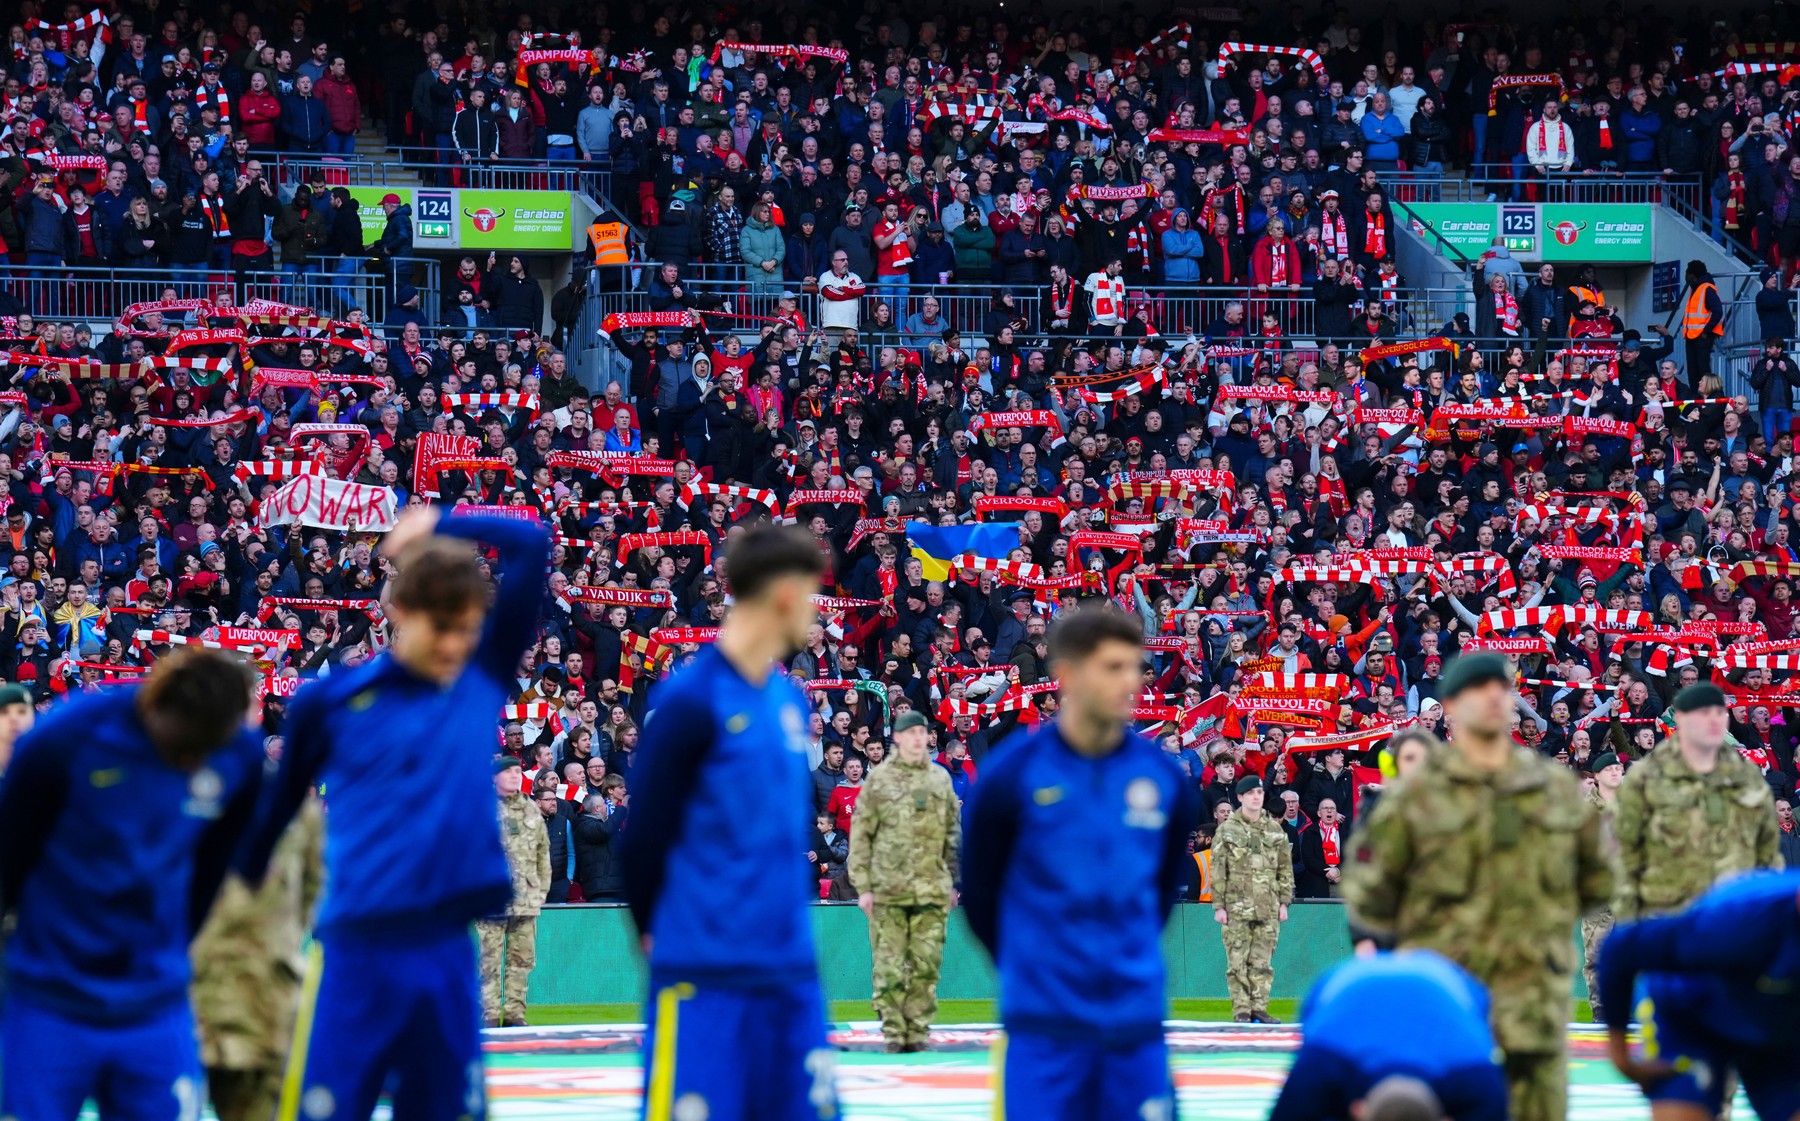 Liverpool fans
Chelsea v Liverpool, EFL Carabao Cup, Final, Football, Wembley Stadium, London, UK - 27 Feb 2022,Image: 665244340, License: Rights-managed, Restrictions: EDITORIAL USE ONLY No use with unauthorised audio, video, data, fixture lists, club/league logos or 